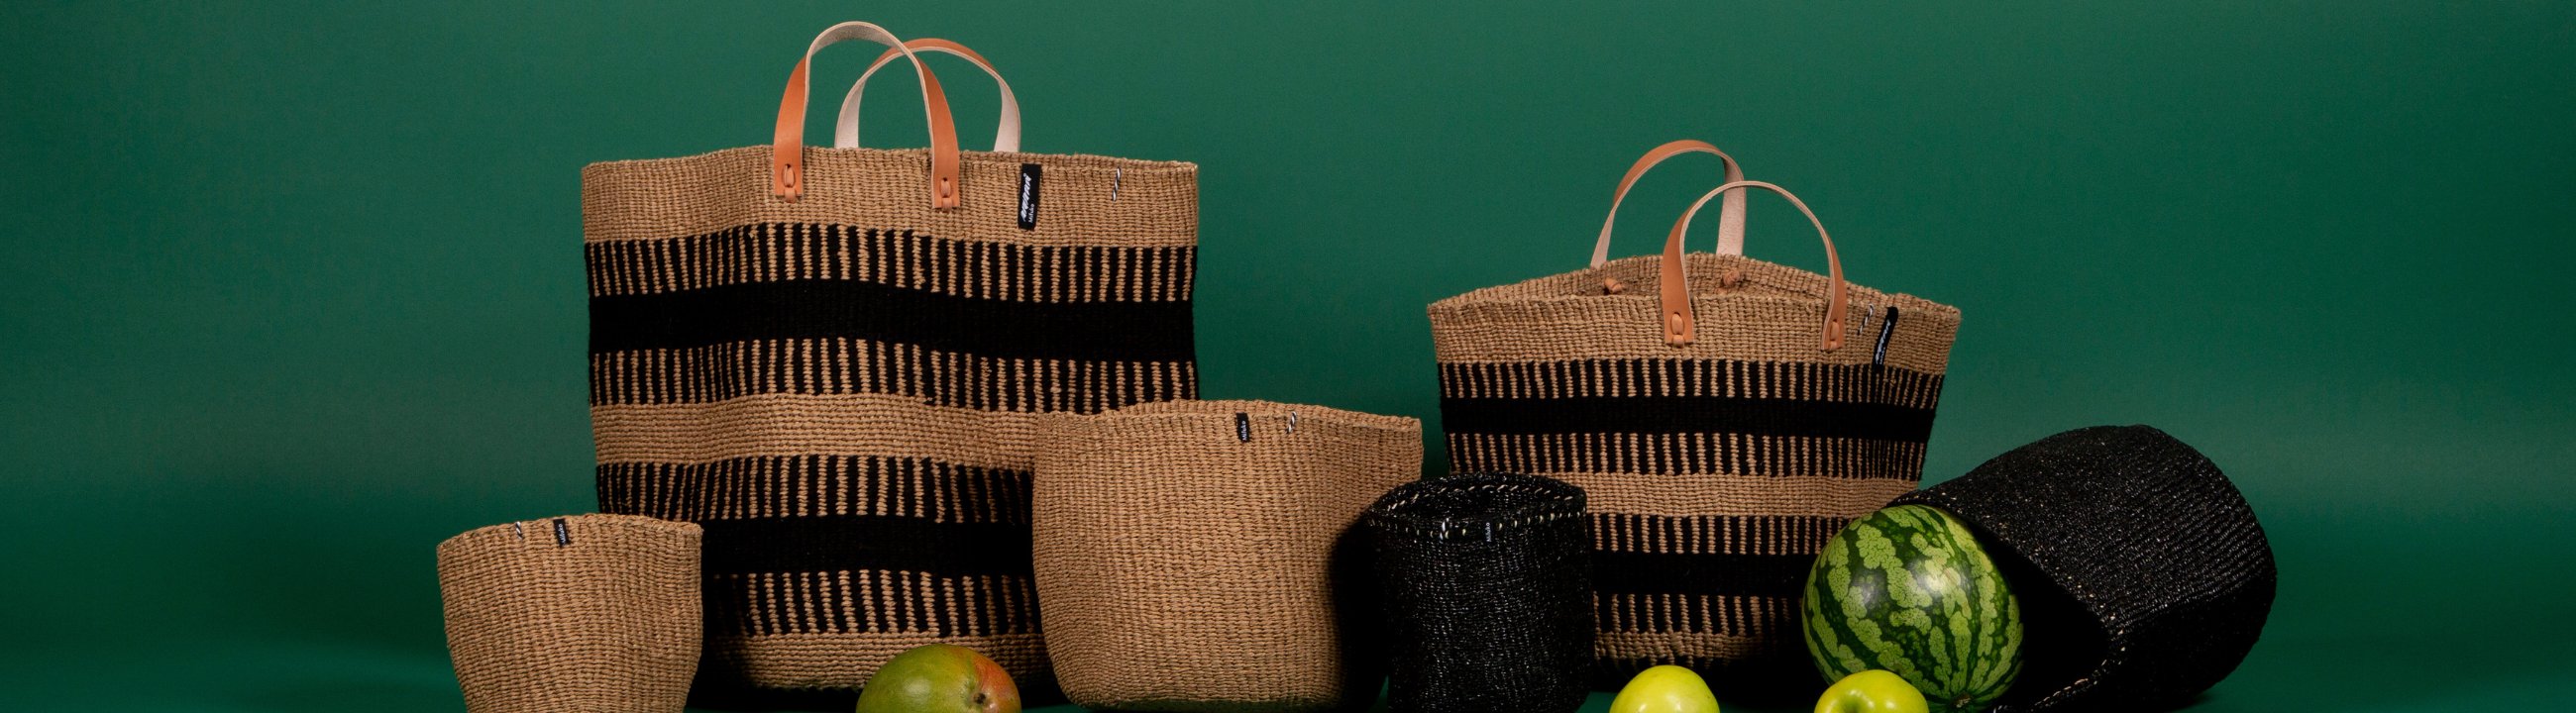 All baskets and bags